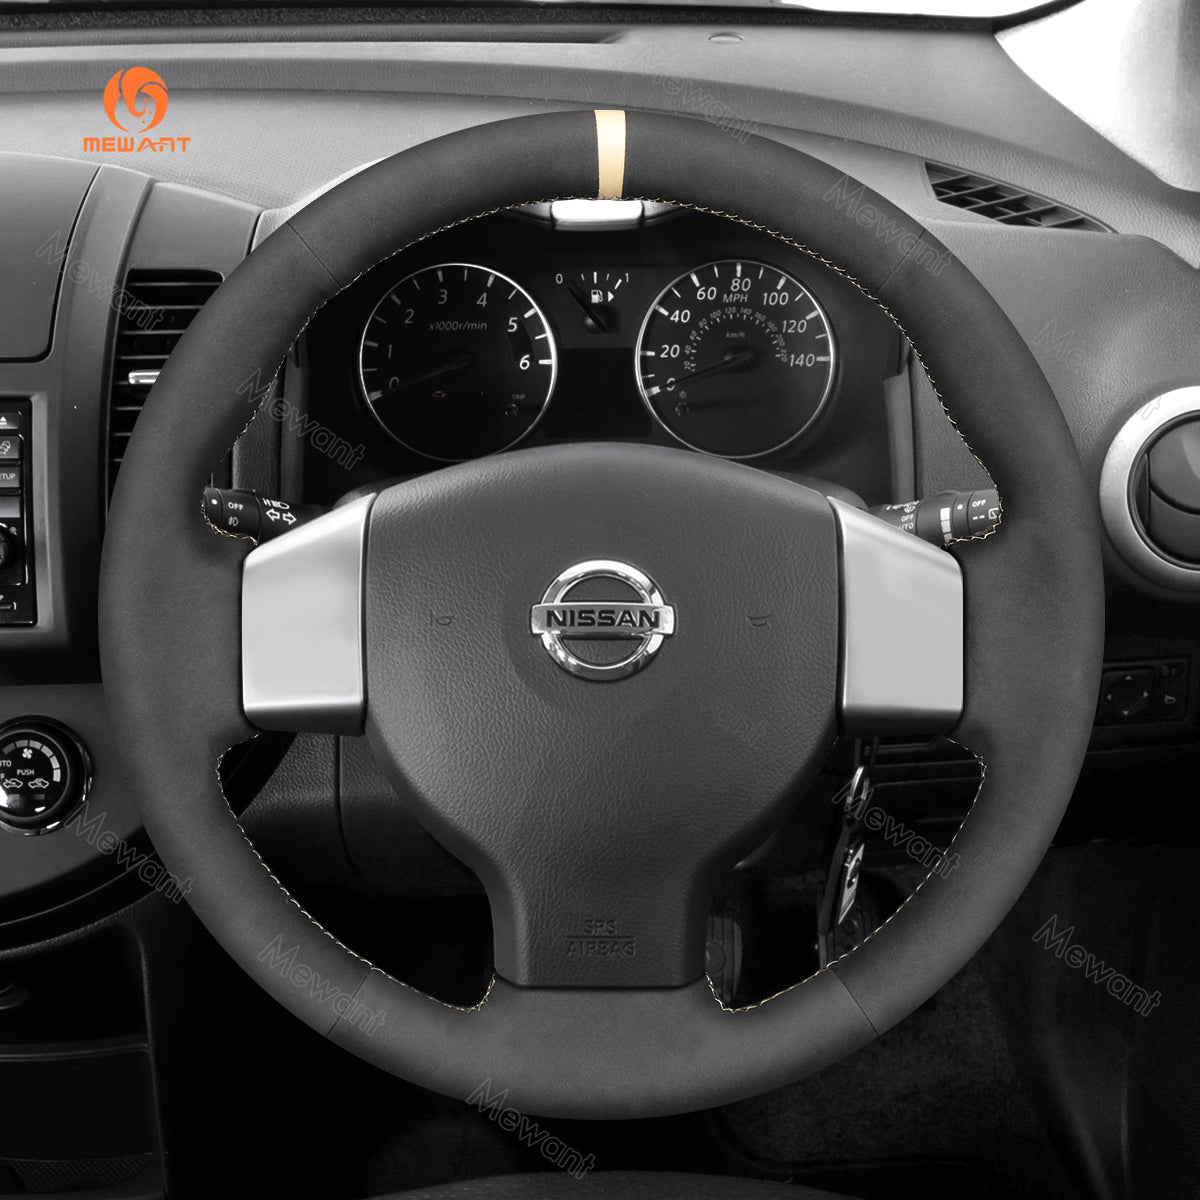 MEWANT Hand Stitch Car Steering Wheel Cover for Nissan Note